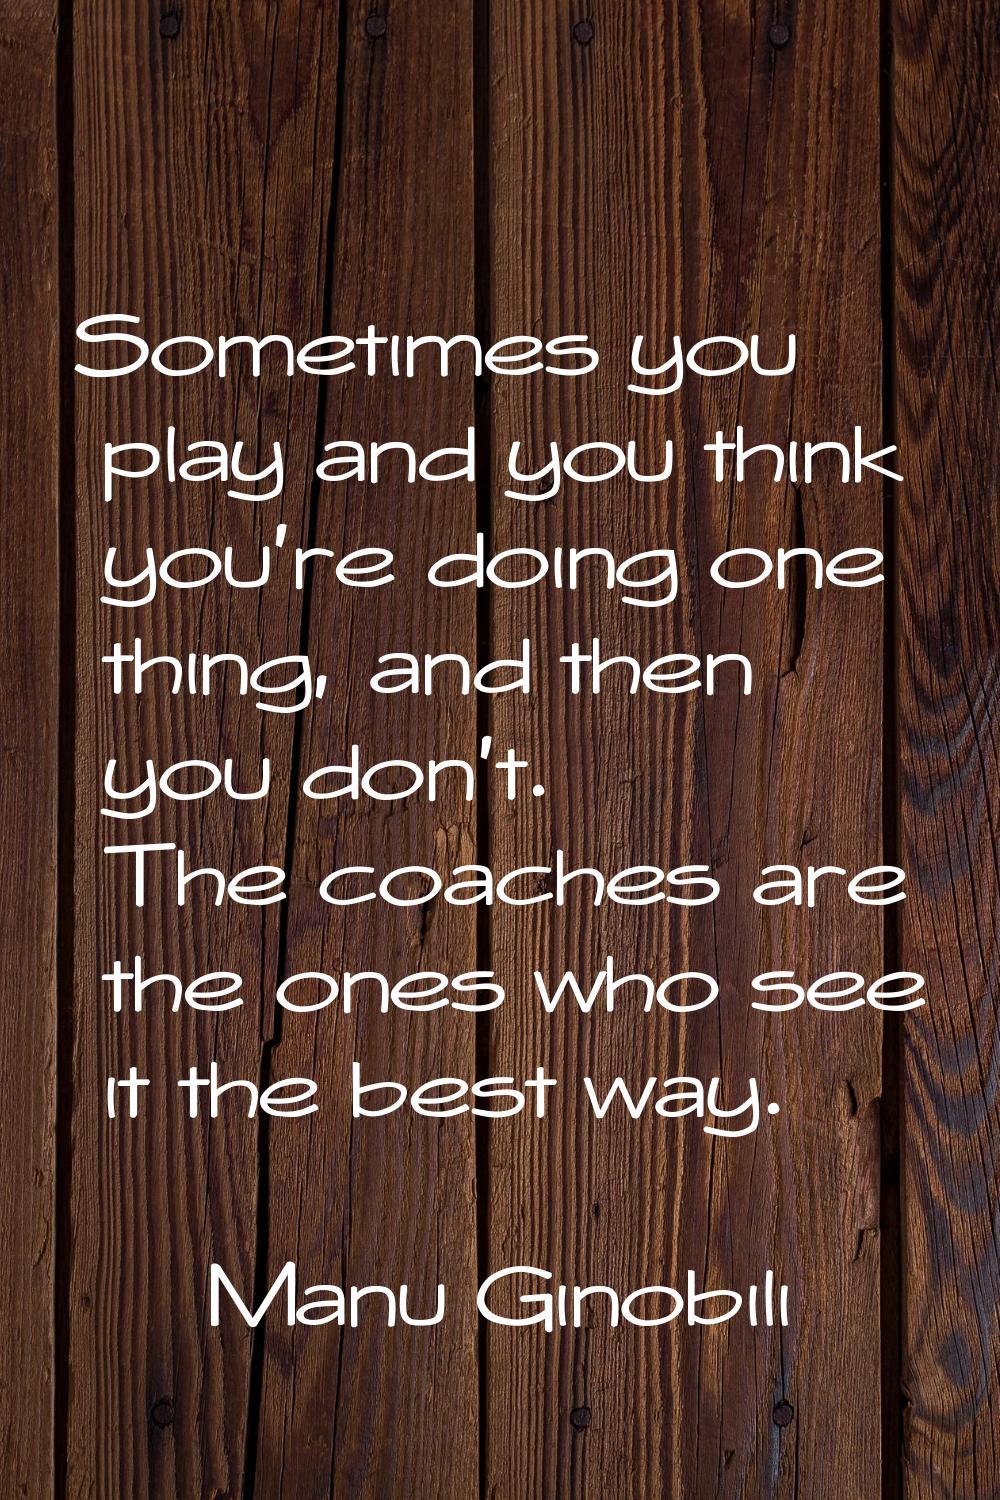 Sometimes you play and you think you're doing one thing, and then you don't. The coaches are the on